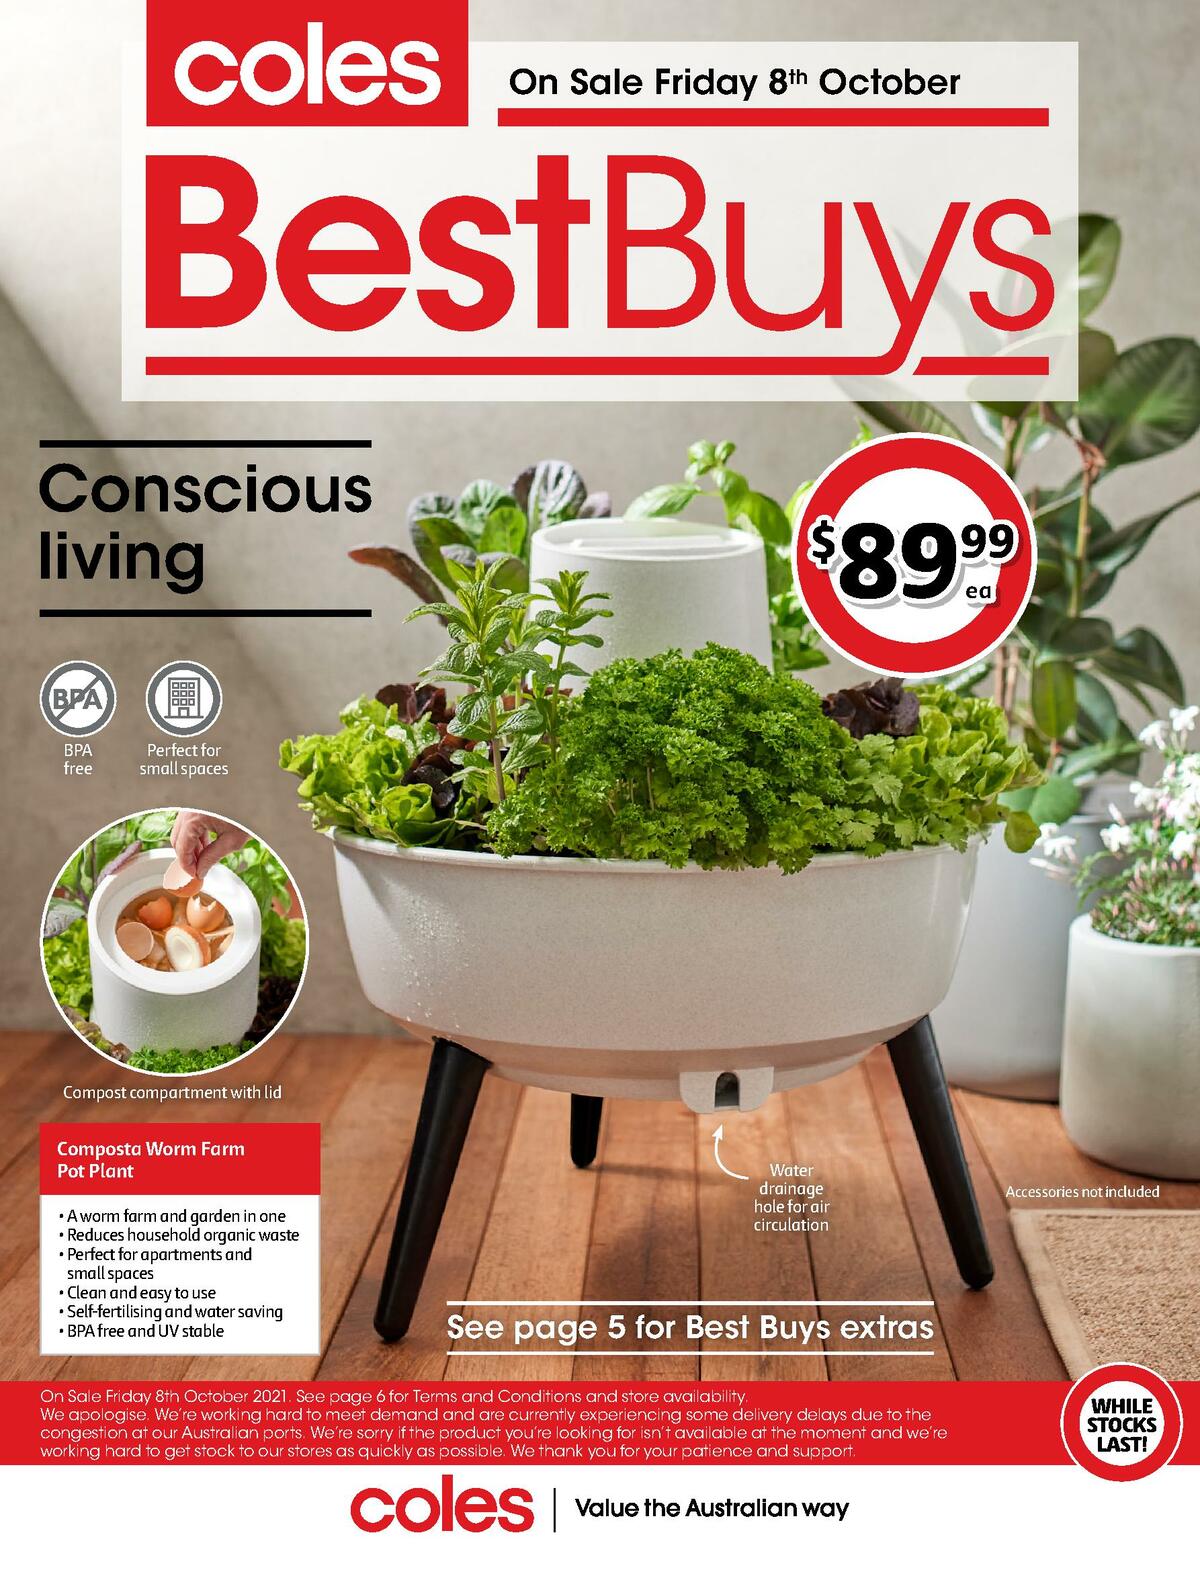 Coles Best Buys - Conscious Living Catalogues from 8 October